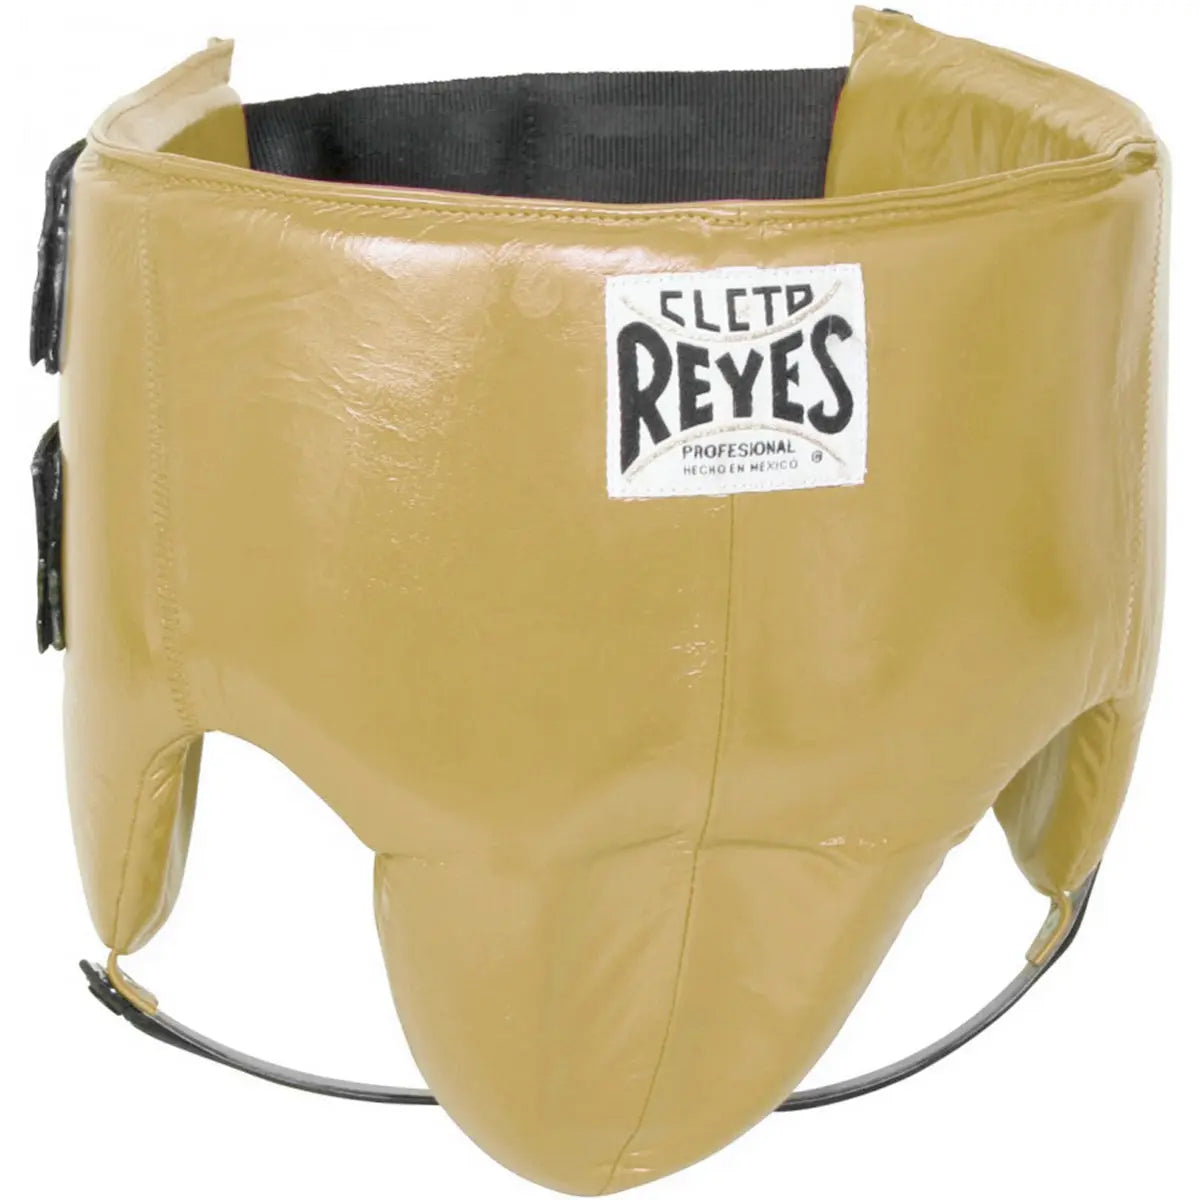 Cleto Reyes Kidney and Foul Padded Protective Cup - Solid Gold Cleto Reyes